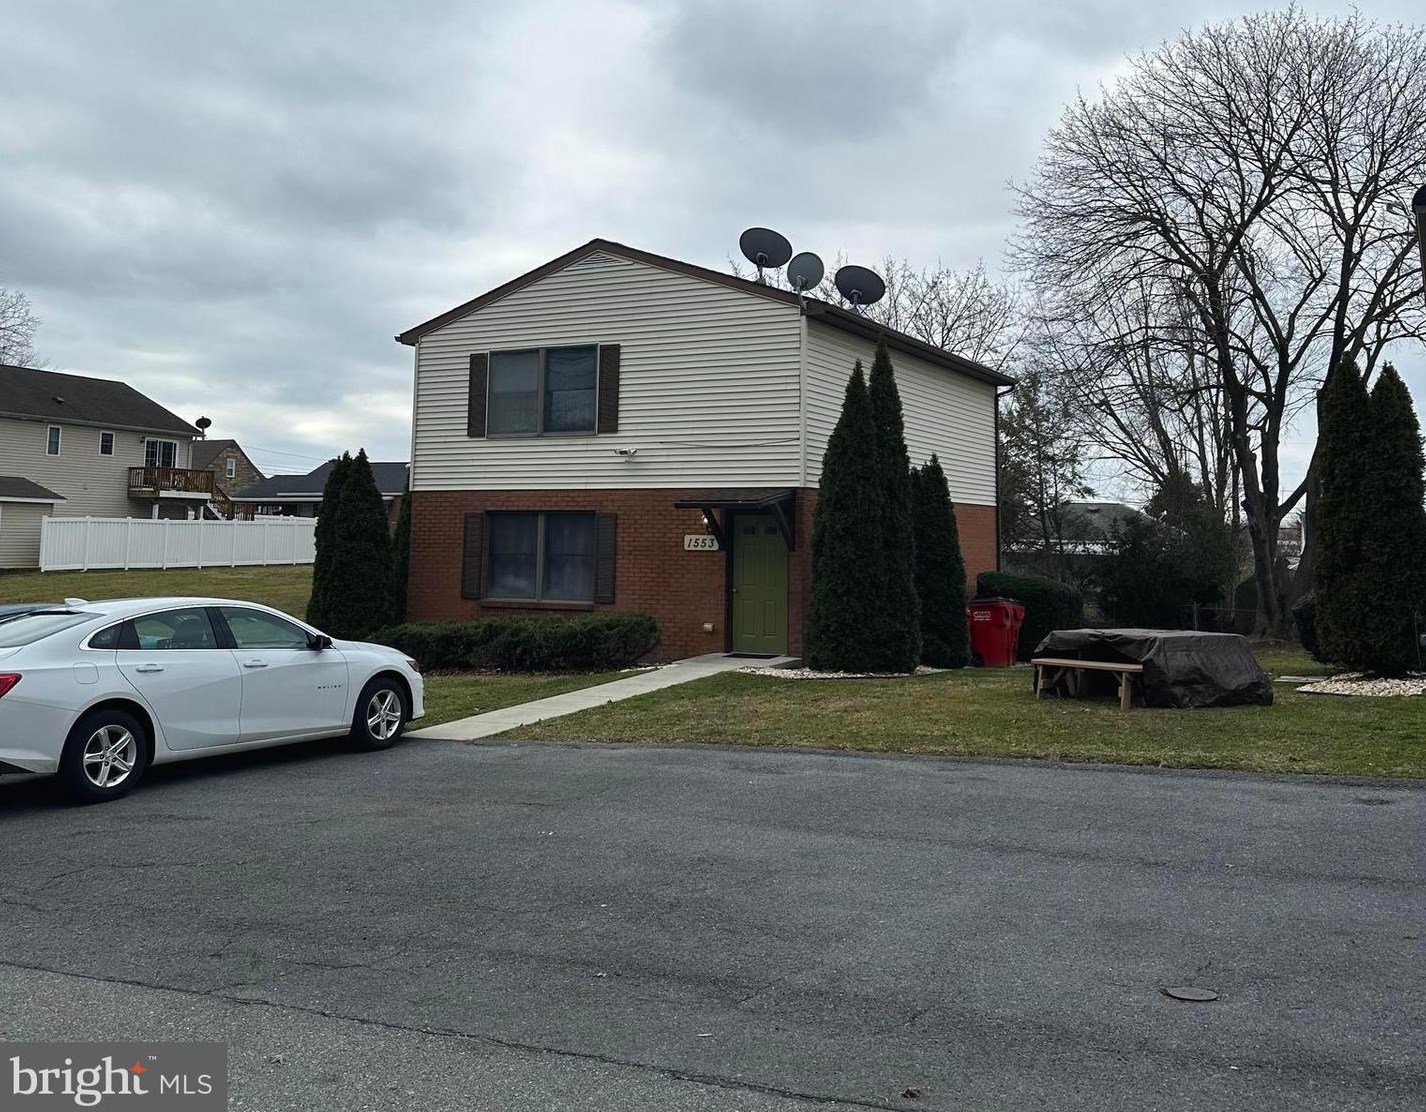 1553 Crest View Ave, Hagerstown, MD 21740